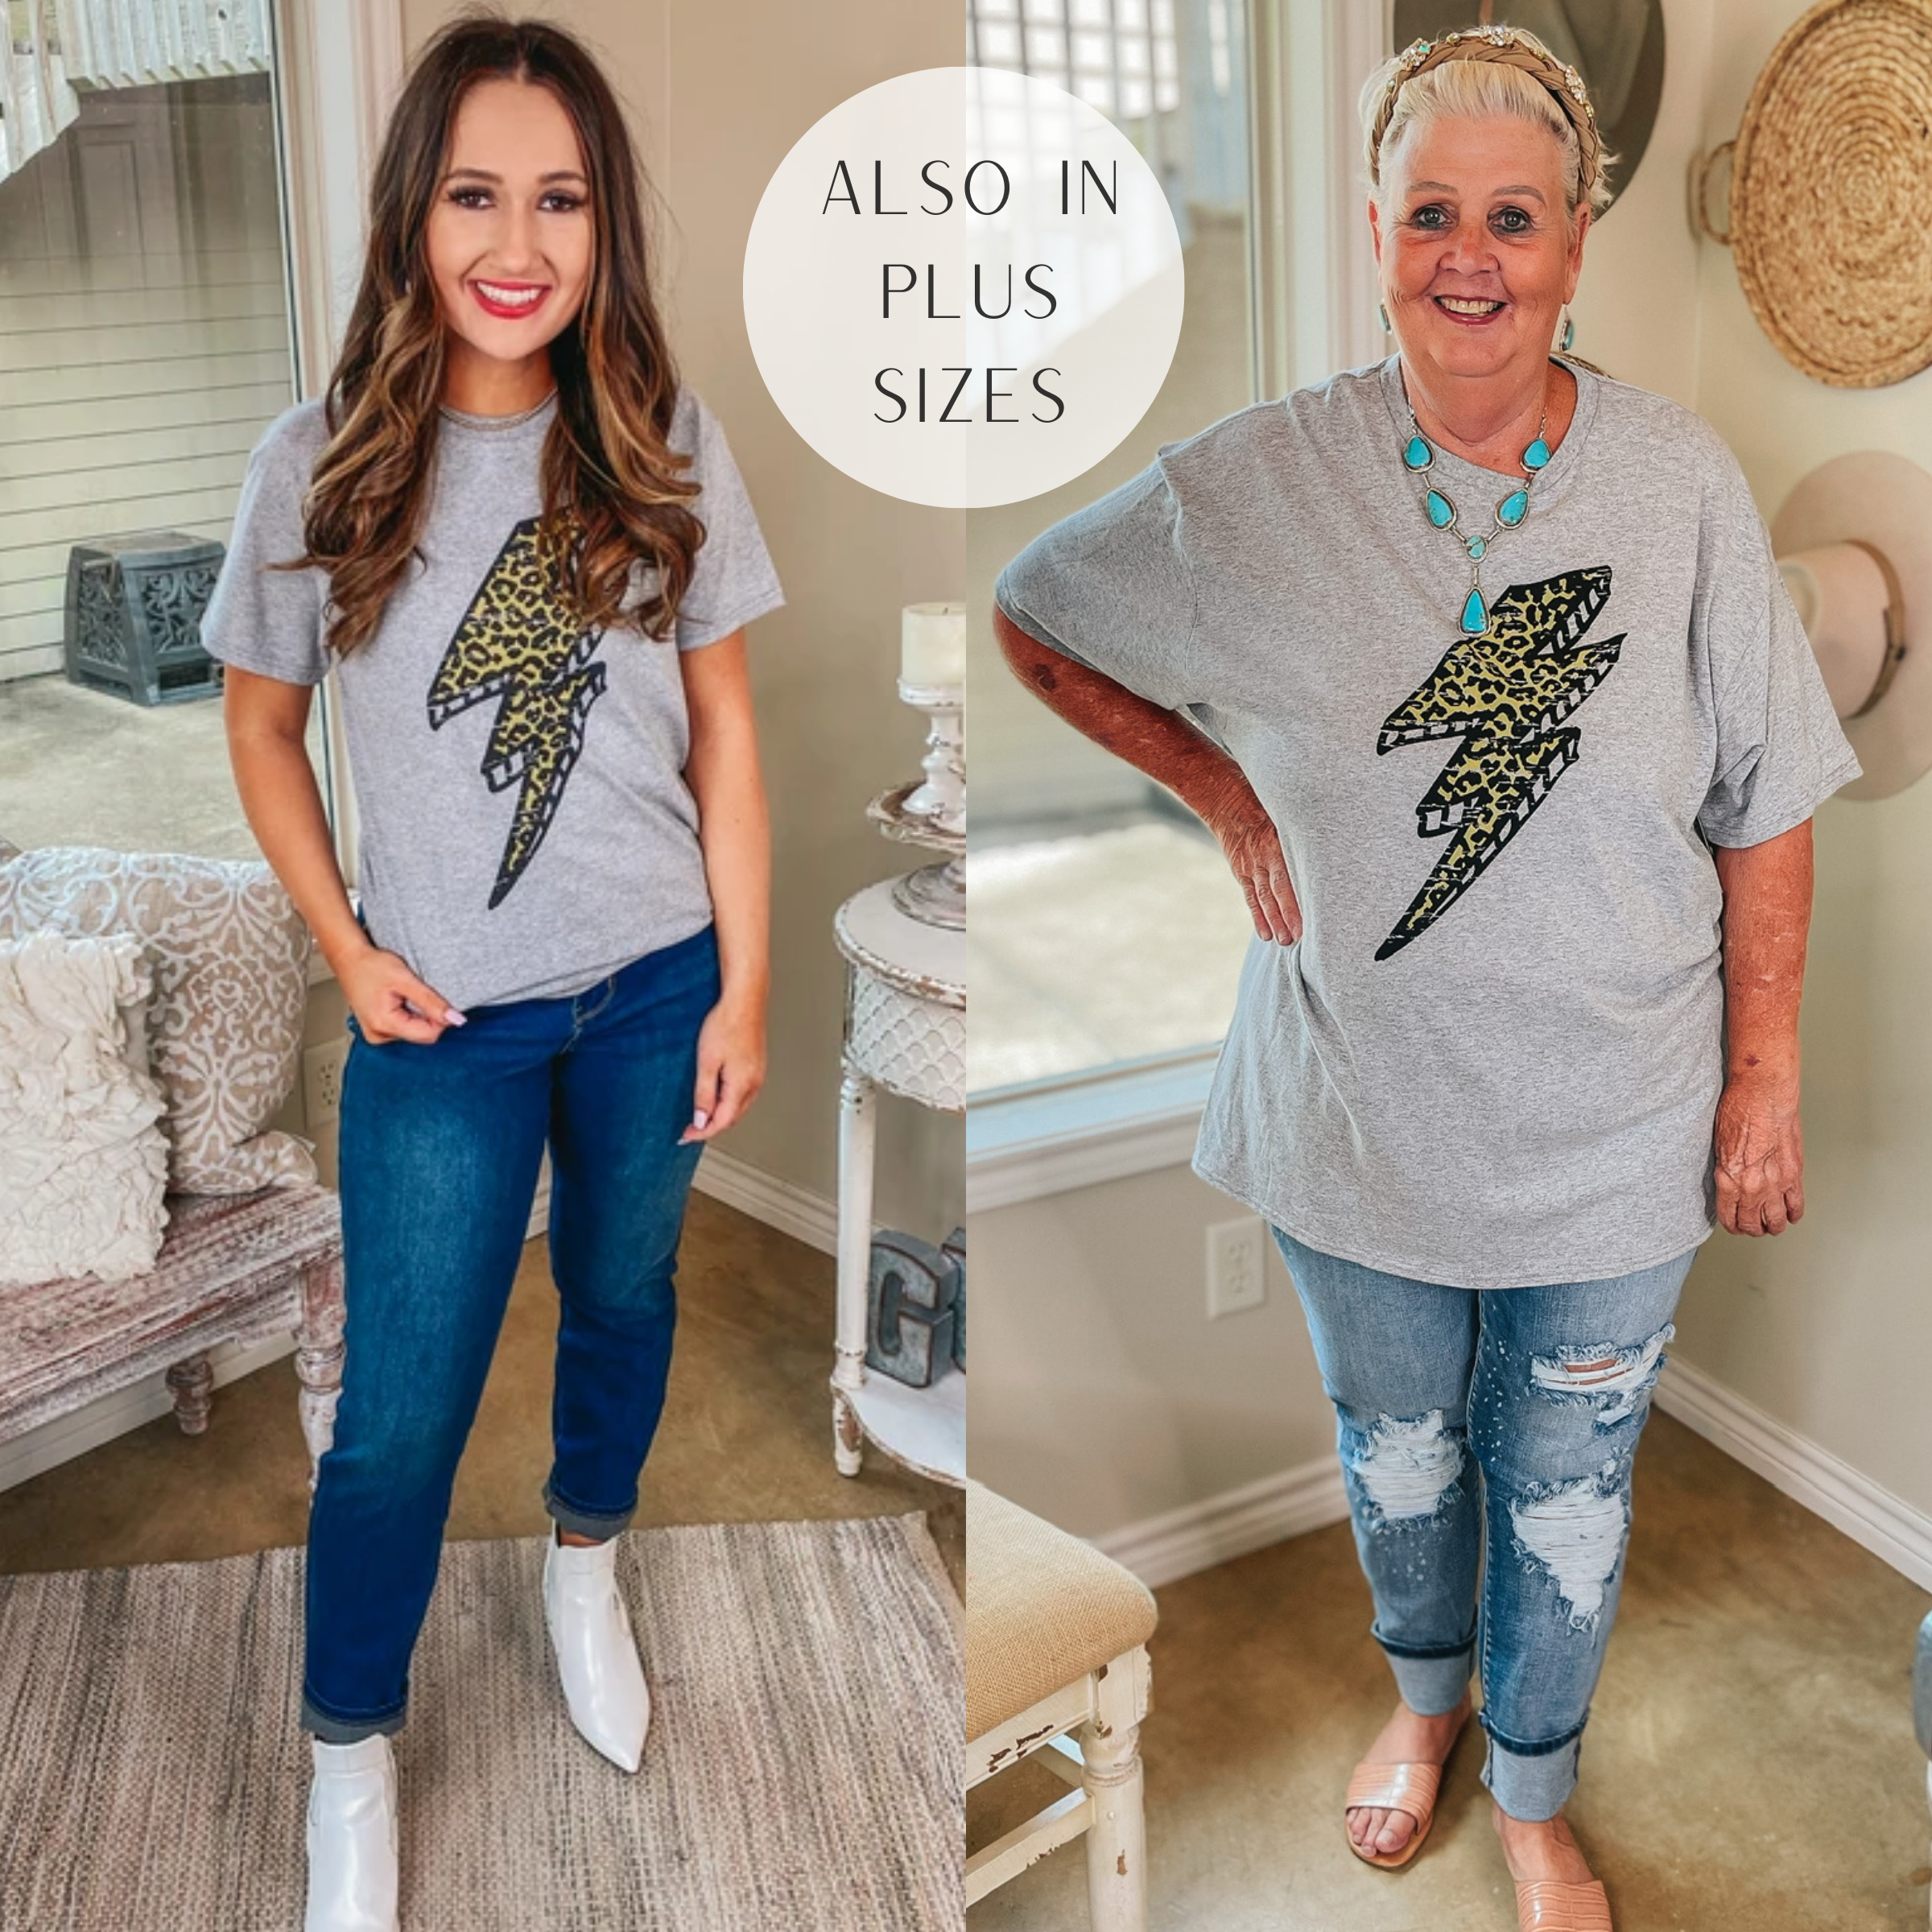 Wild Storm Leopard Lightning Bolt Short Sleeve Graphic Tee in Heather Grey - Giddy Up Glamour Boutique